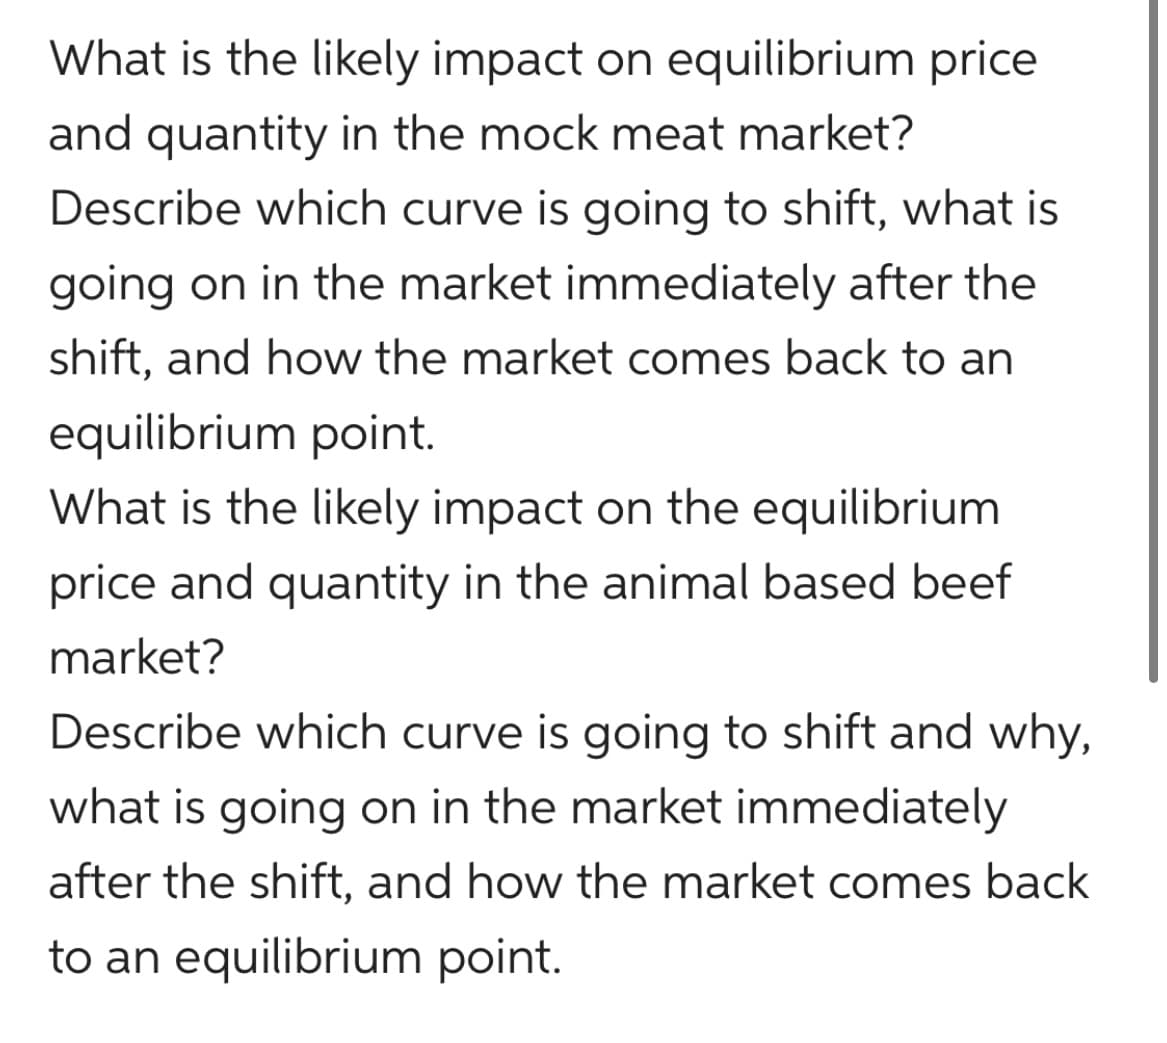 What is the likely impact on equilibrium price
and quantity in the mock meat market?
Describe which curve is going to shift, what is
going on in the market immediately after the
shift, and how the market comes back to an
equilibrium point.
What is the likely impact on the equilibrium
price and quantity in the animal based beef
market?
Describe which curve is going to shift and why,
what is going on in the market immediately
after the shift, and how the market comes back
to an equilibrium point.
